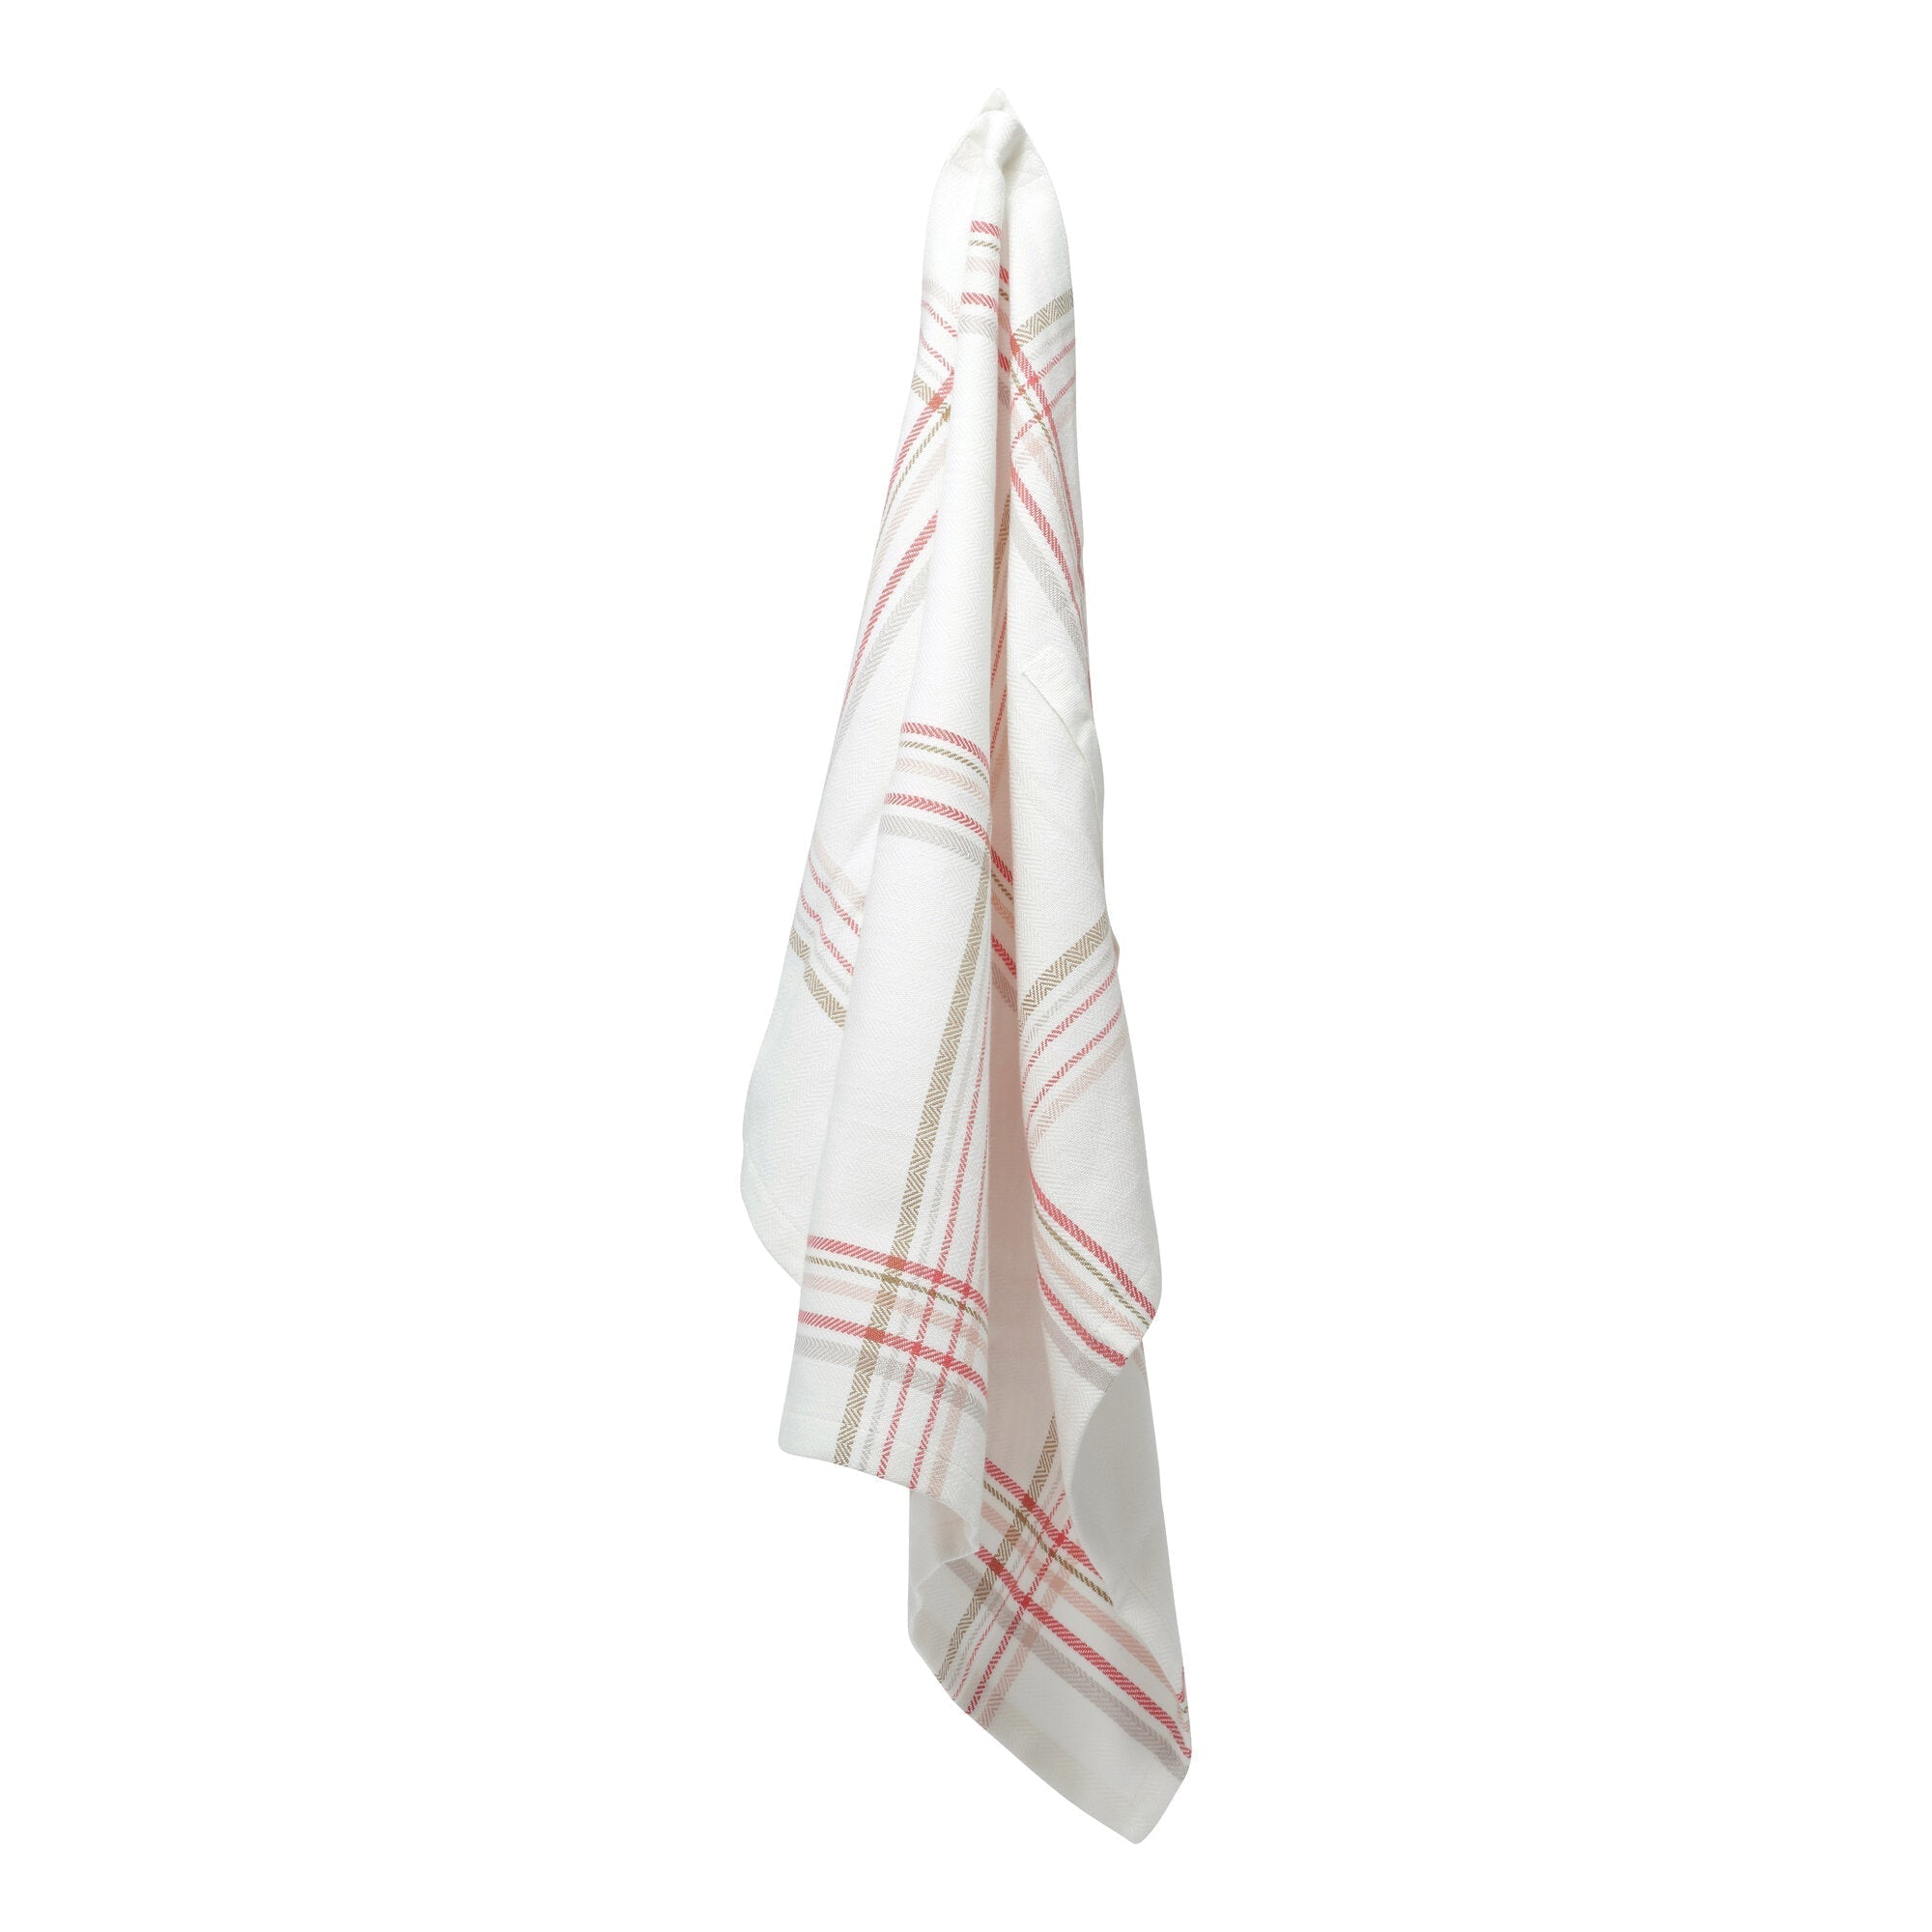 The Organic Company Kitchen Towel, Floral Check